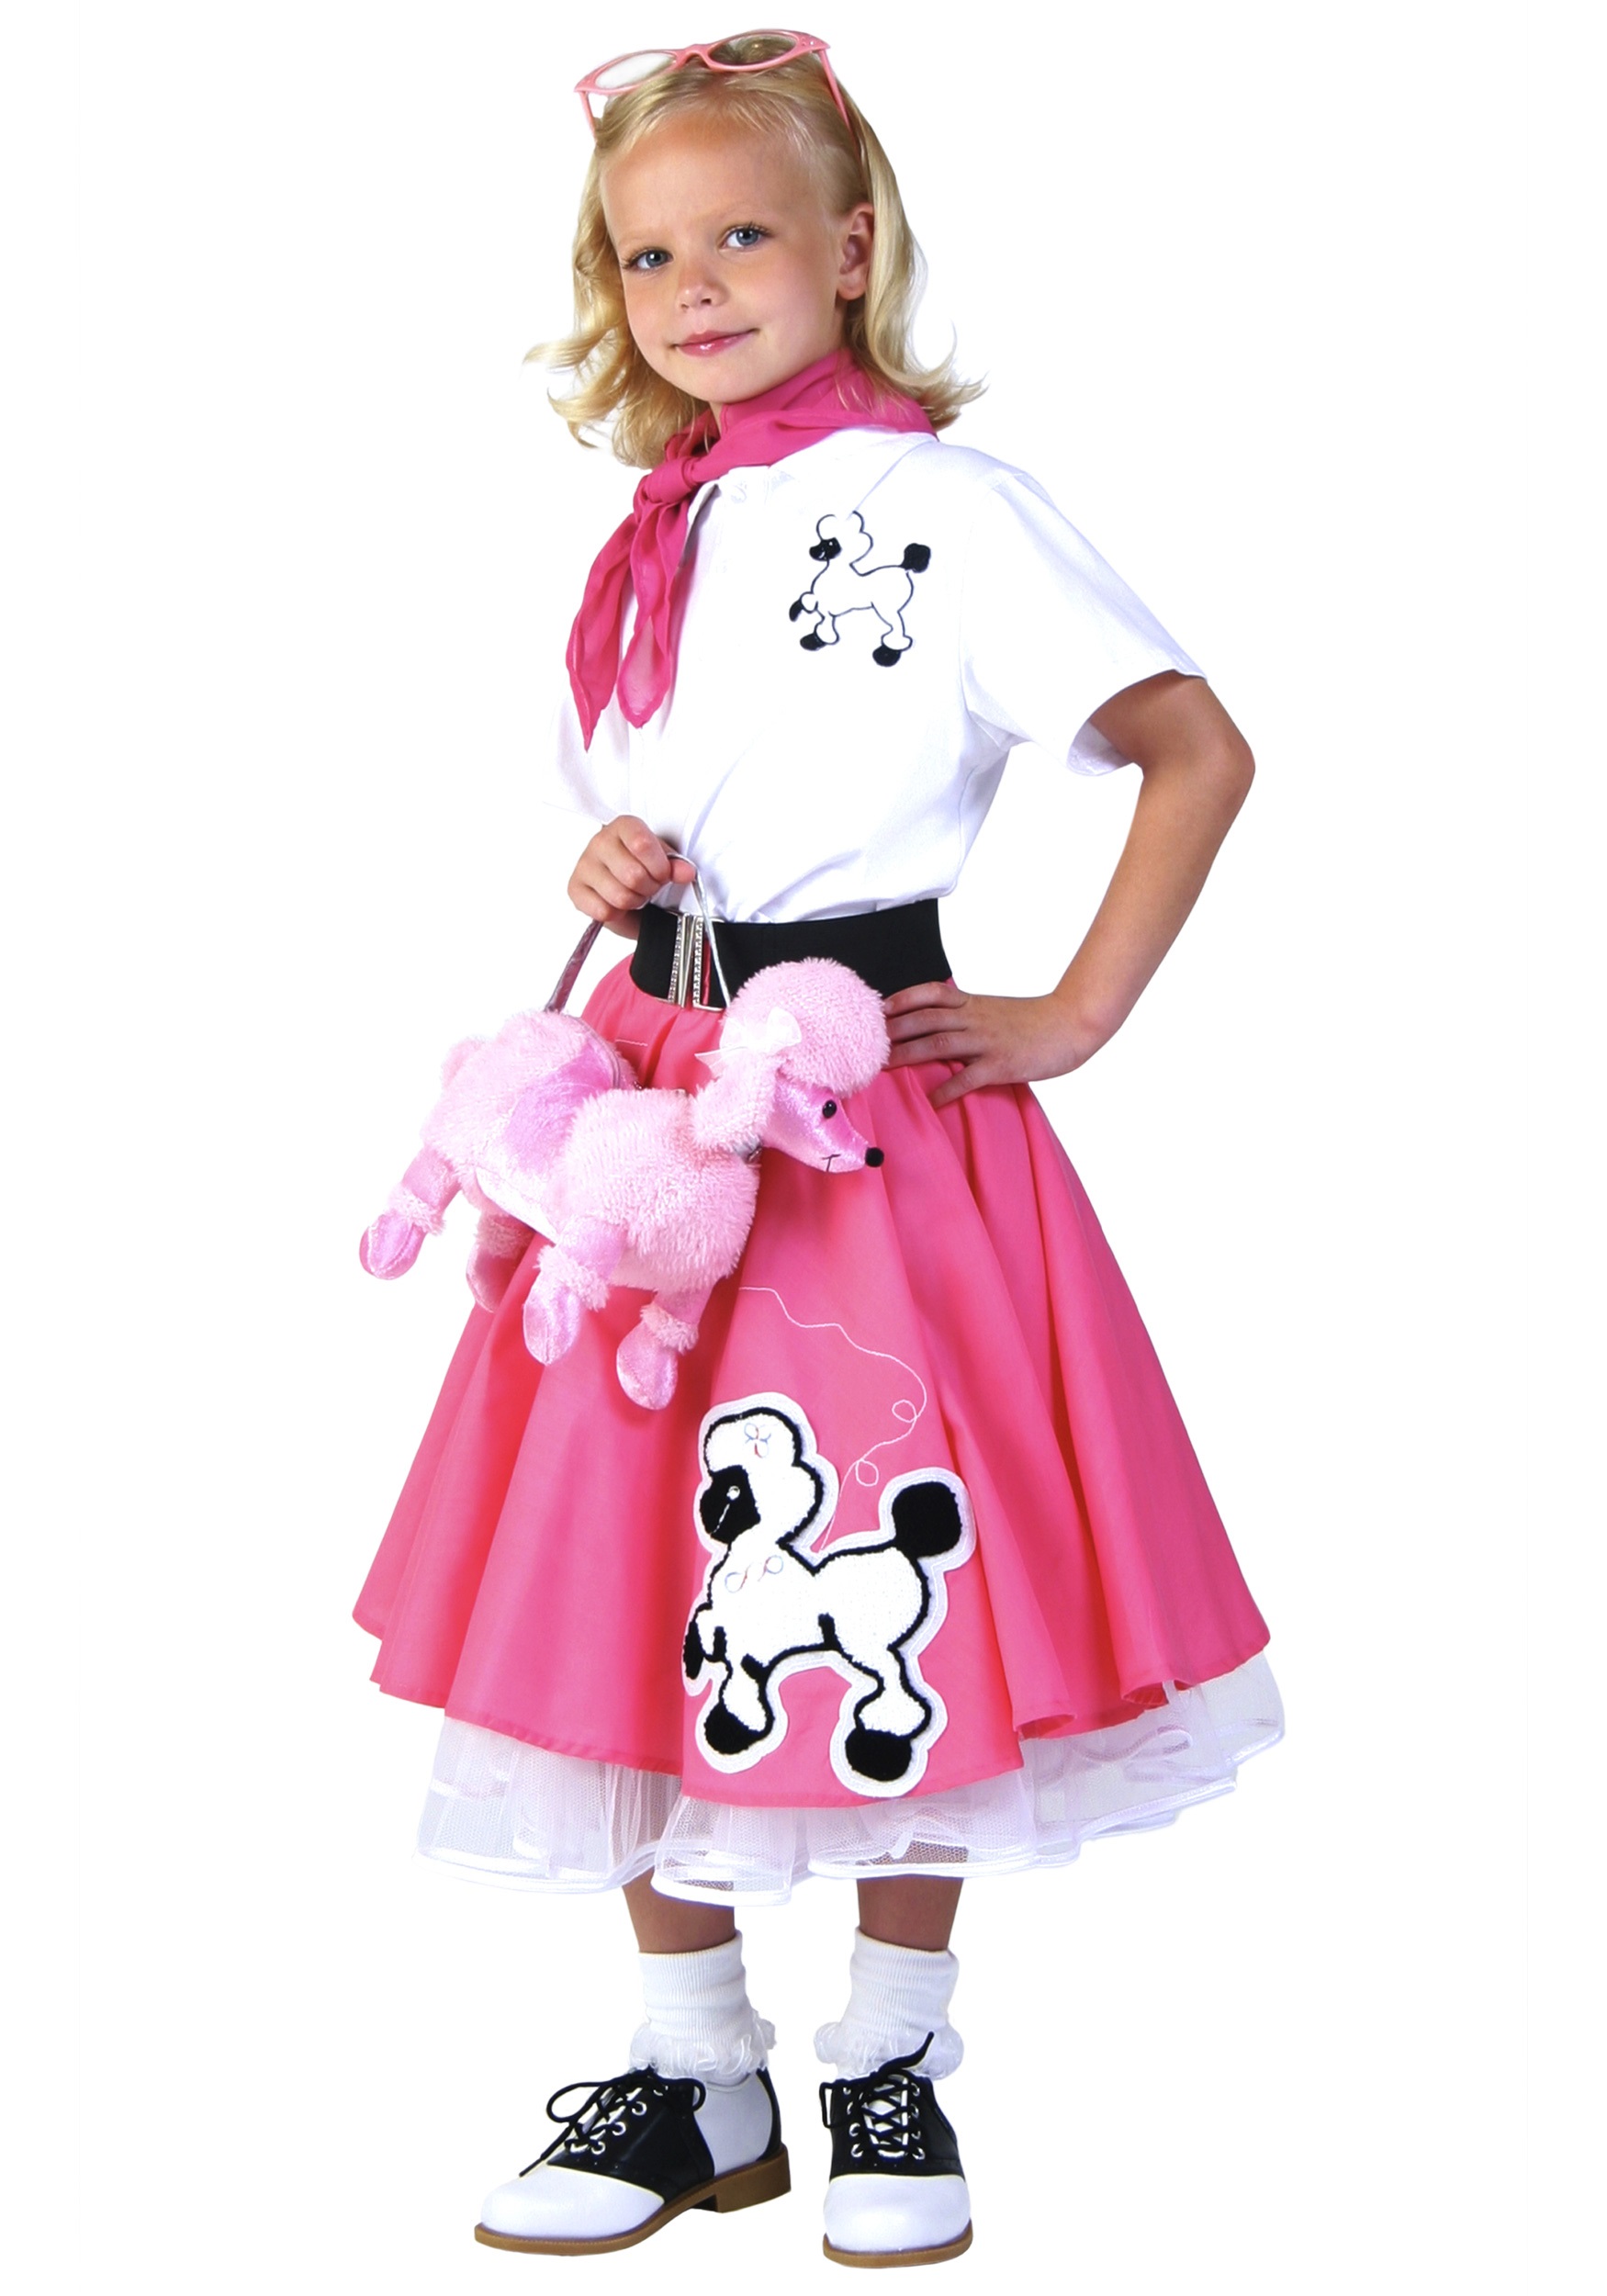 Womens 1950s Poodle Skirt Set with Black Shirt USA Made by Pookey Snoo -  Perfect Outfit for Sock Hop or Halloween costume – Pookey Snoo Poodle Skirts